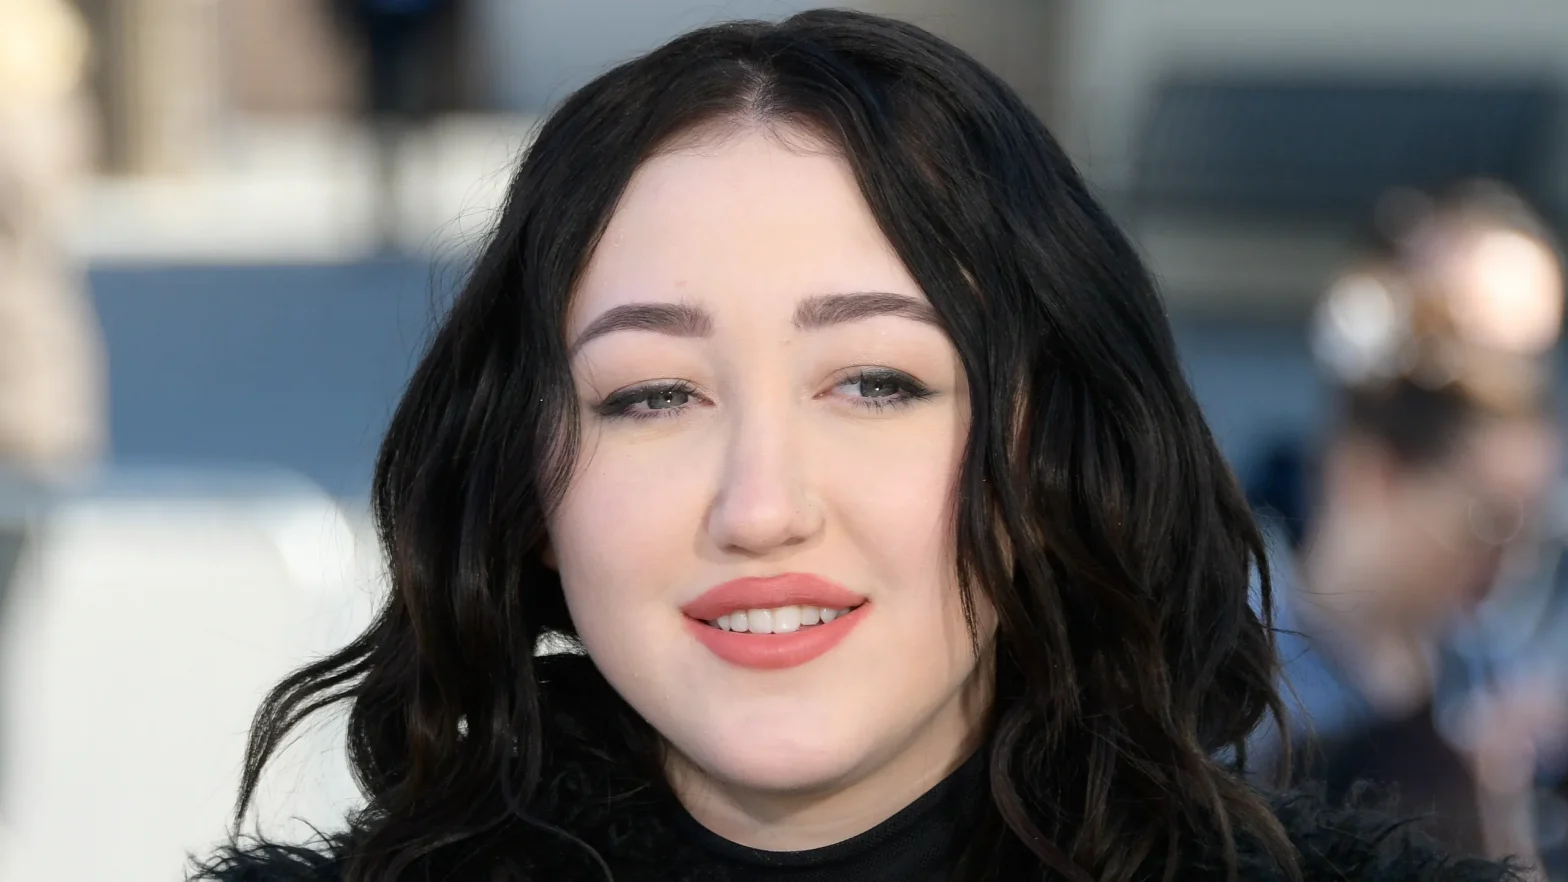 Who is Noah Cyrus, sister of Miley Cyrus?